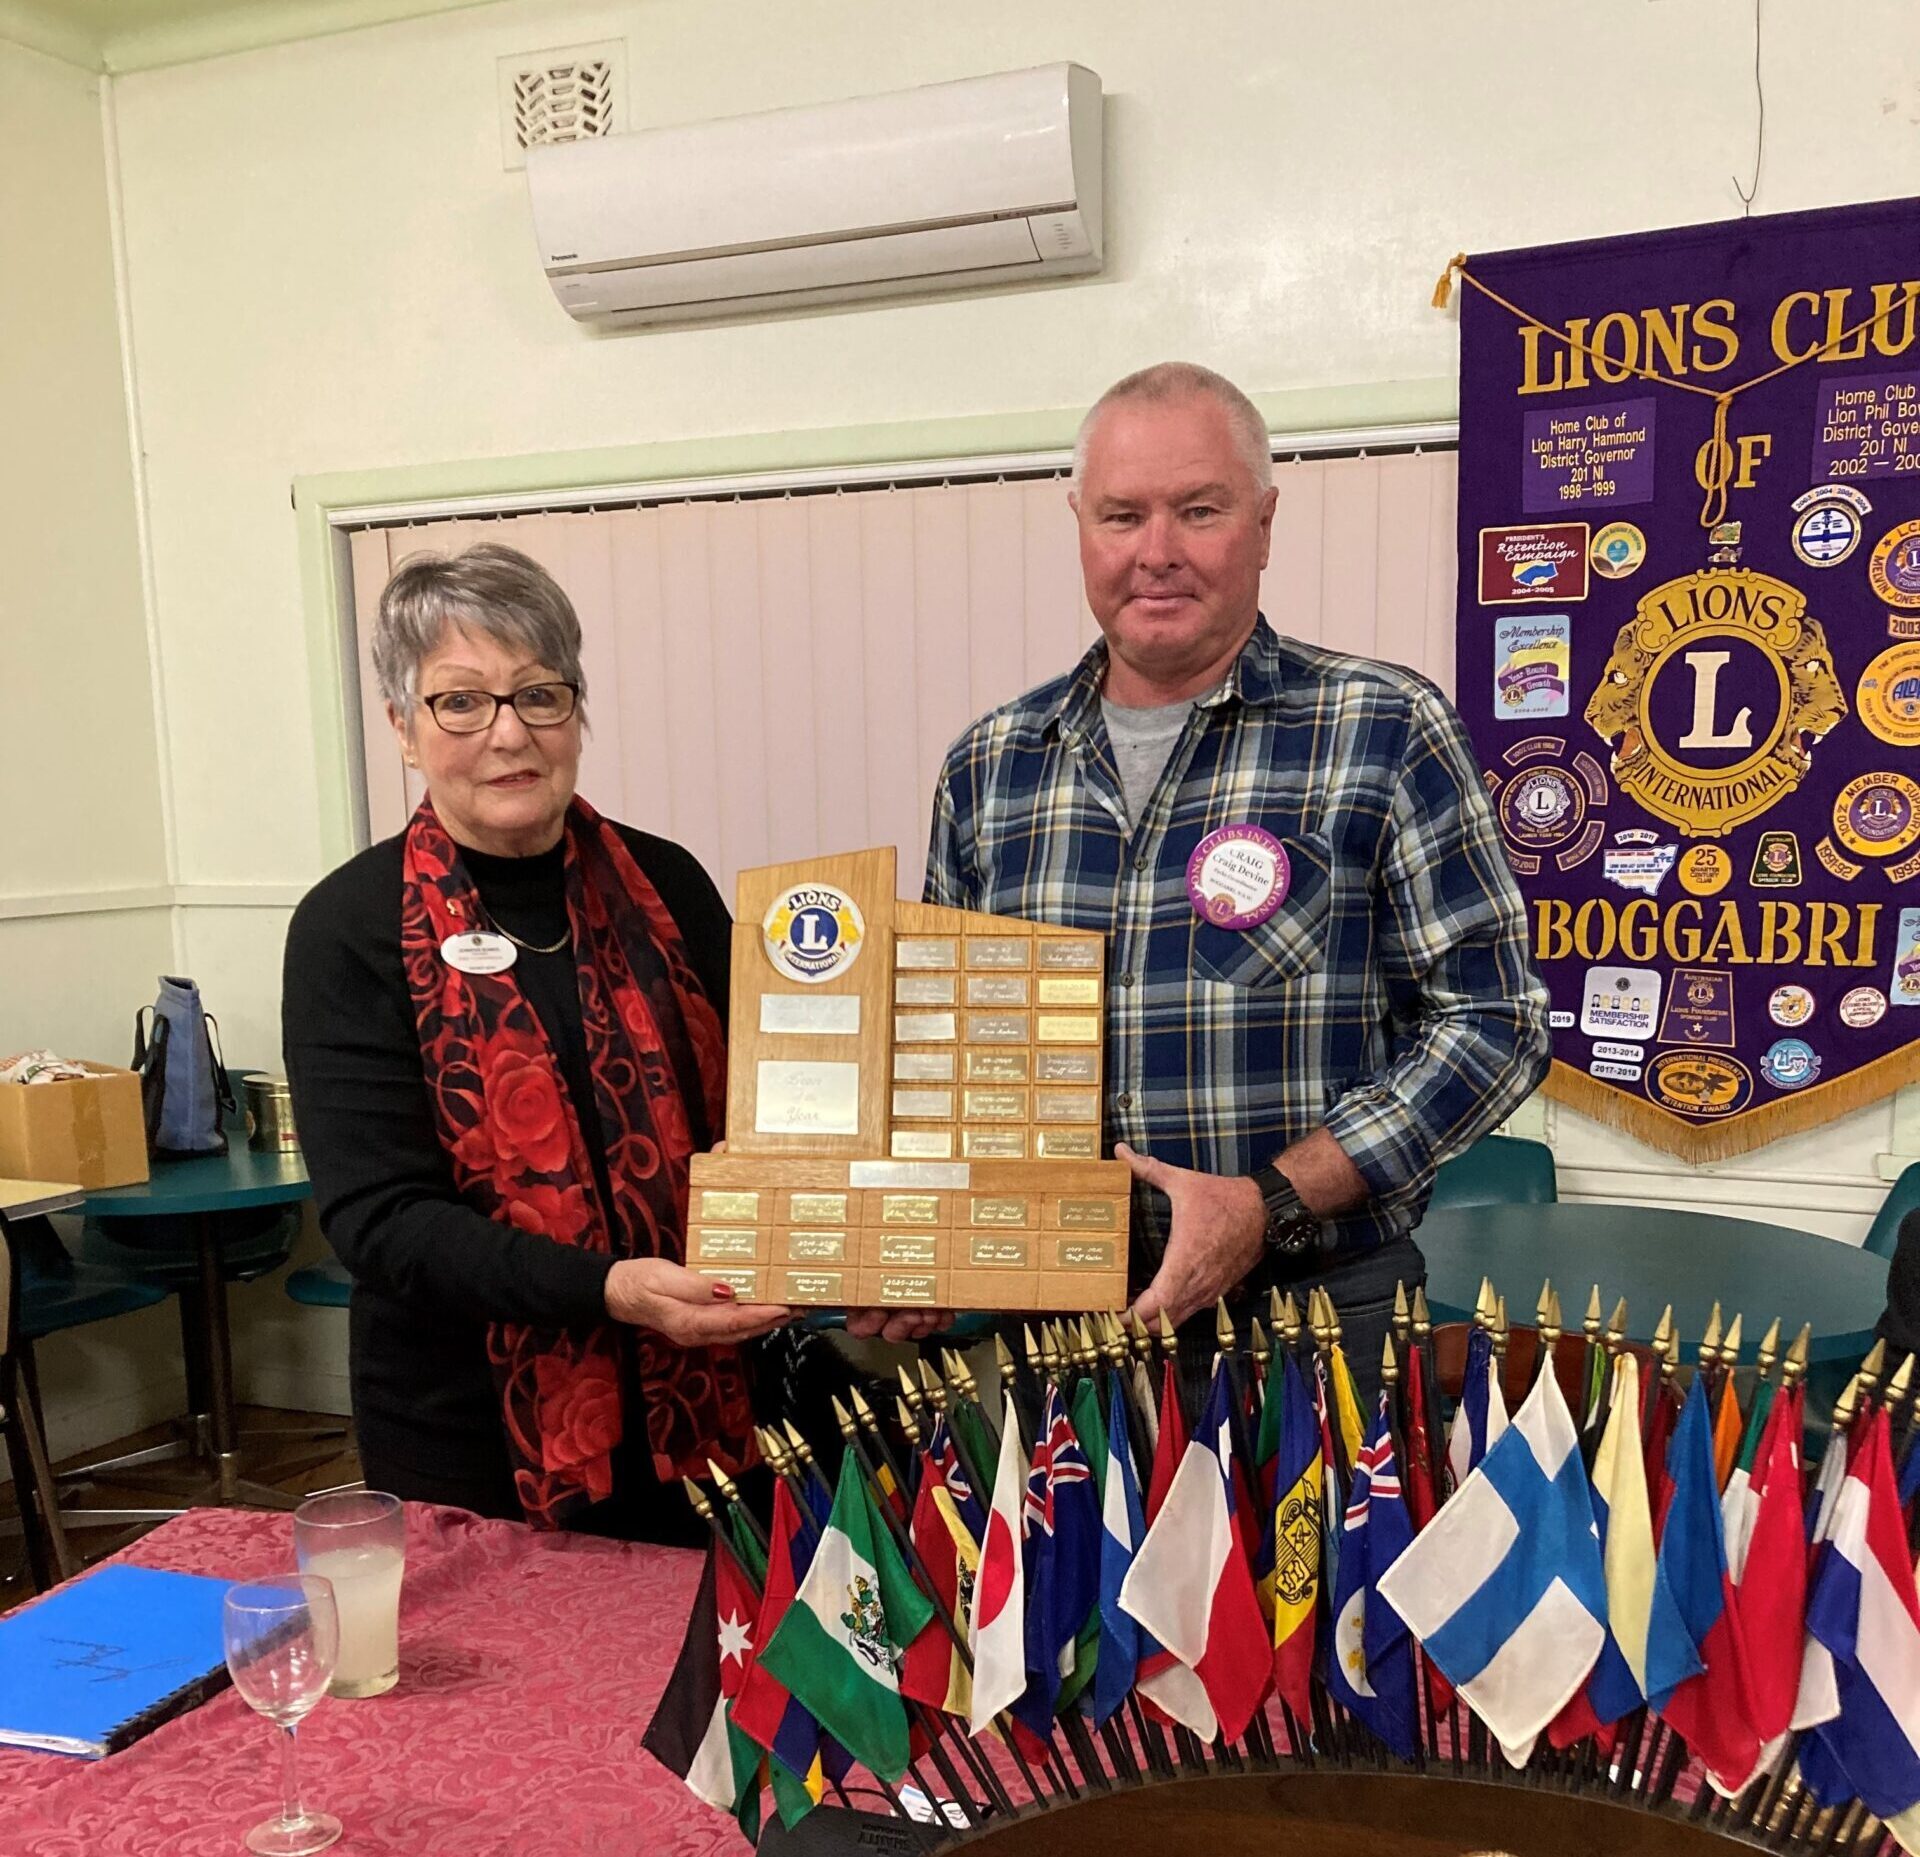 New board announced at Lions Club annual general meeting